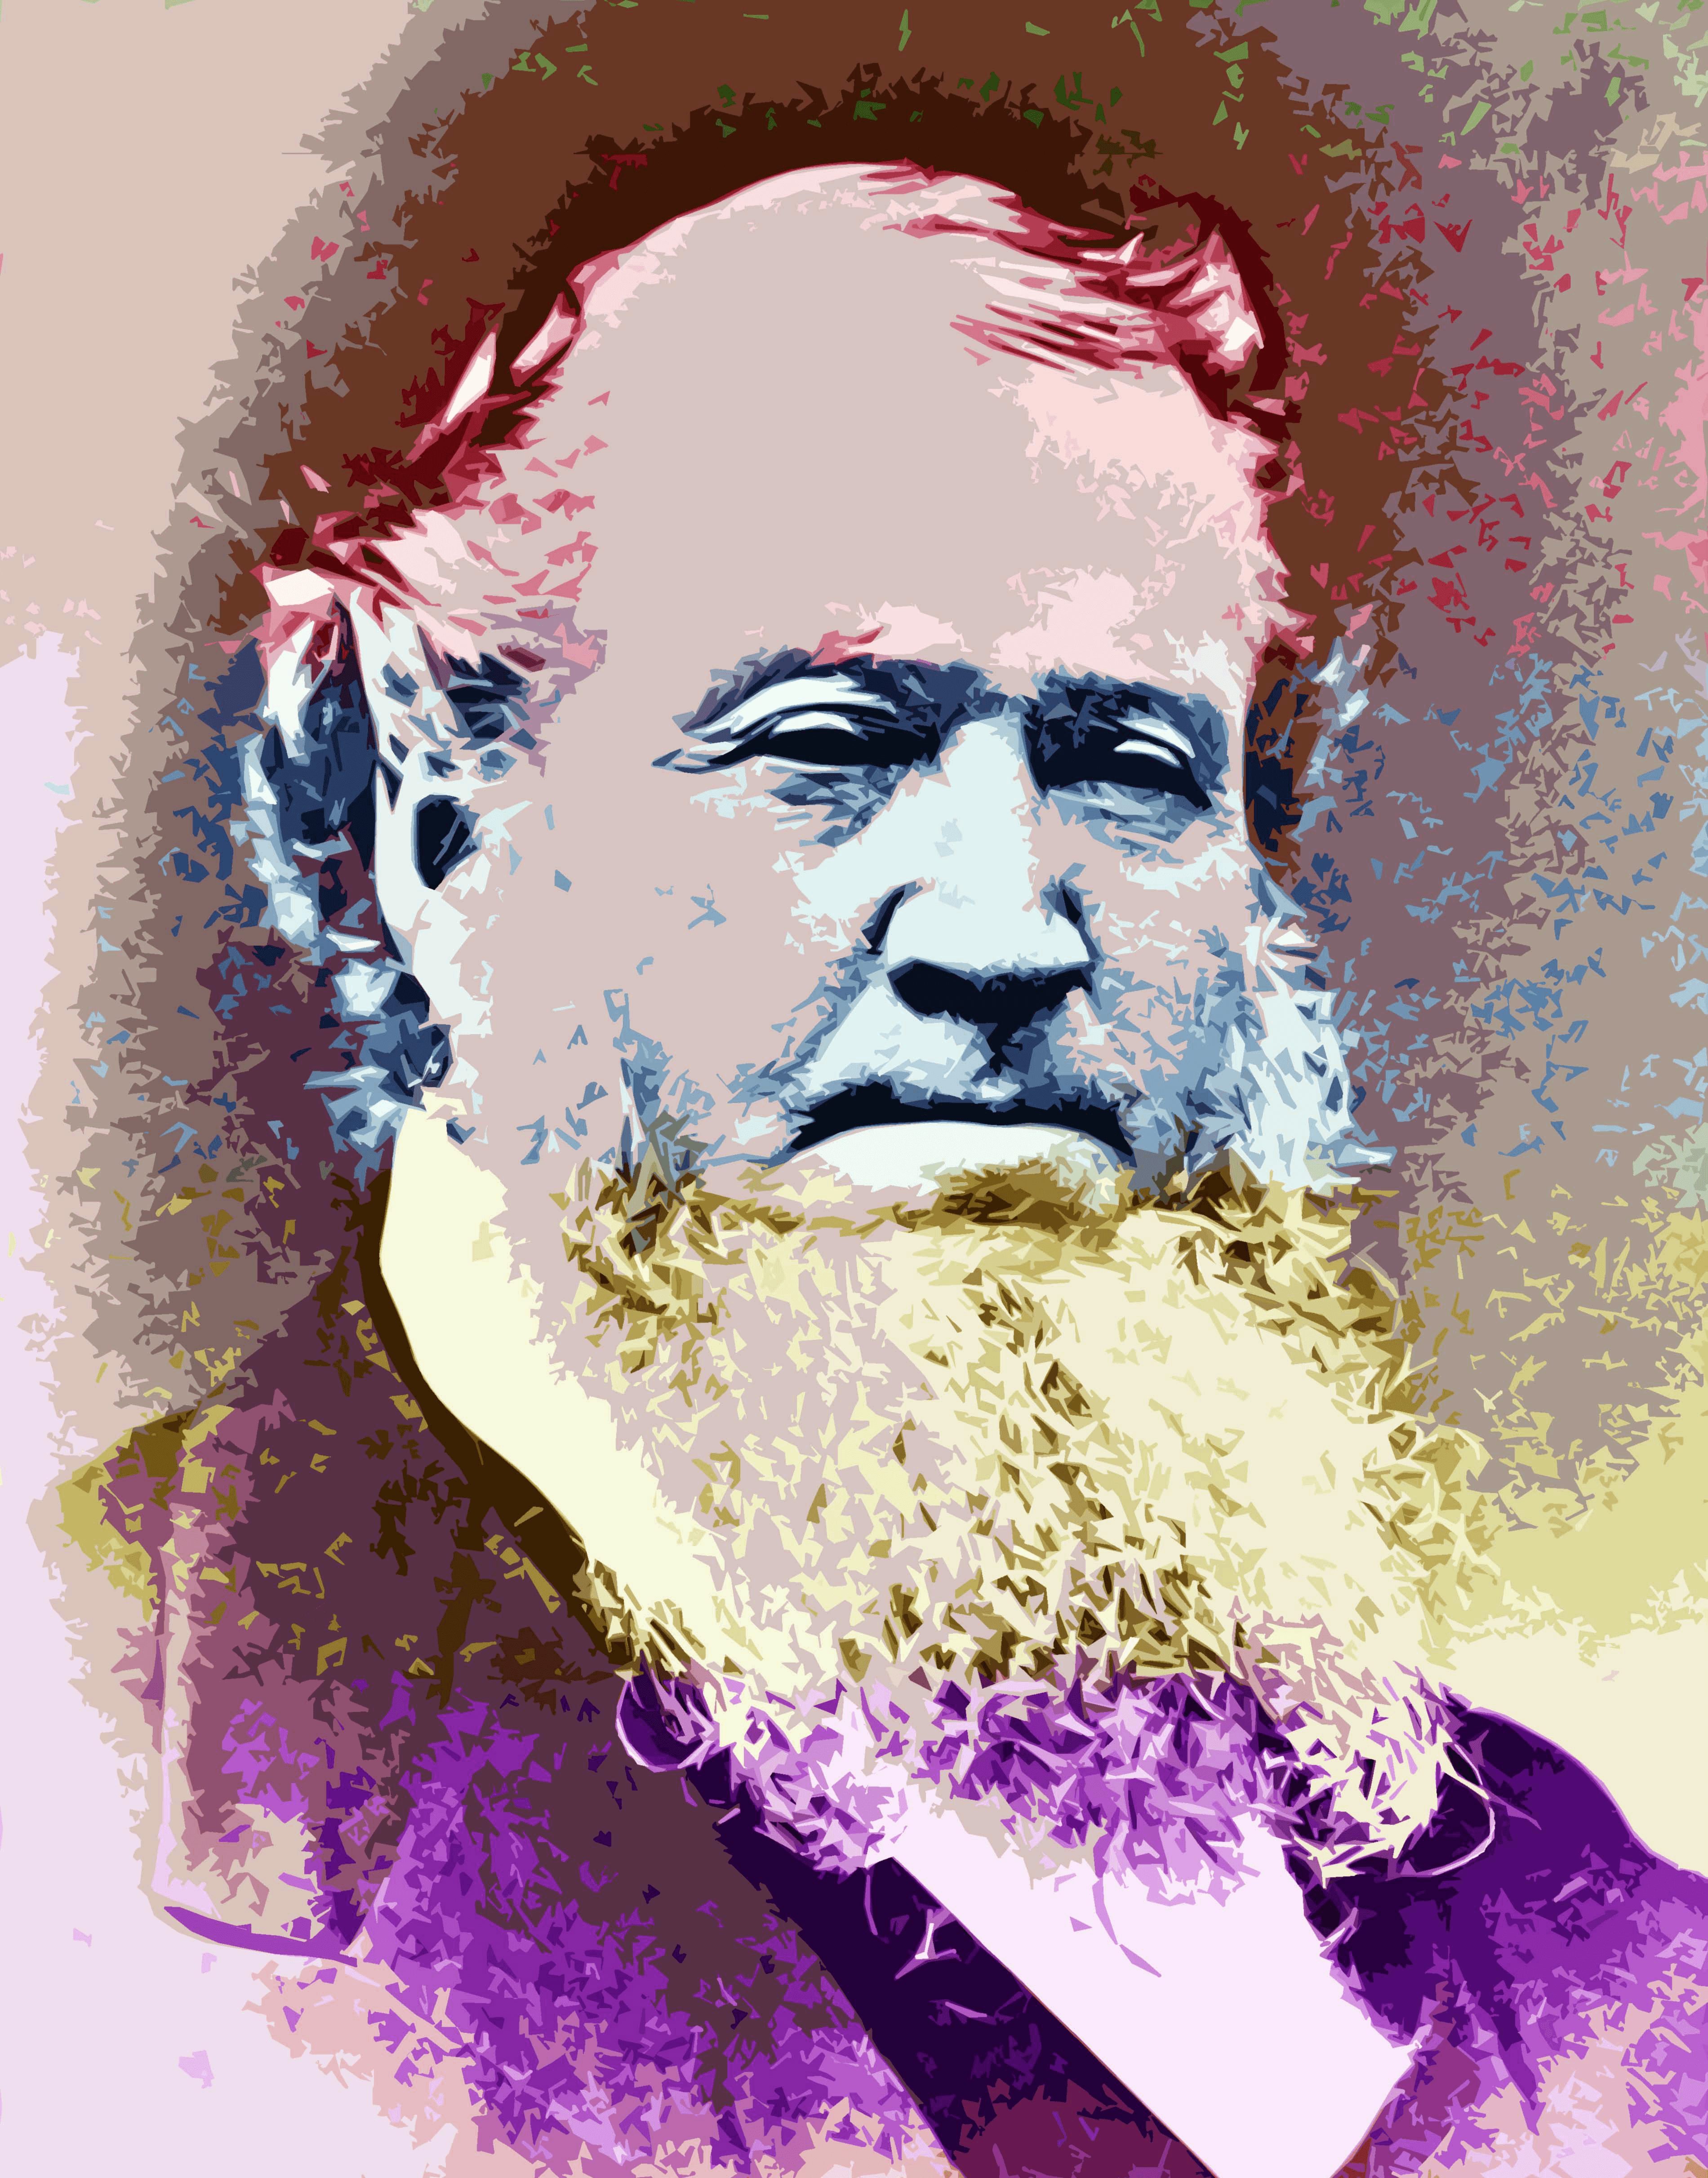 Brigham Young, President of The Church of Jesus Christ of Latter-day Saints